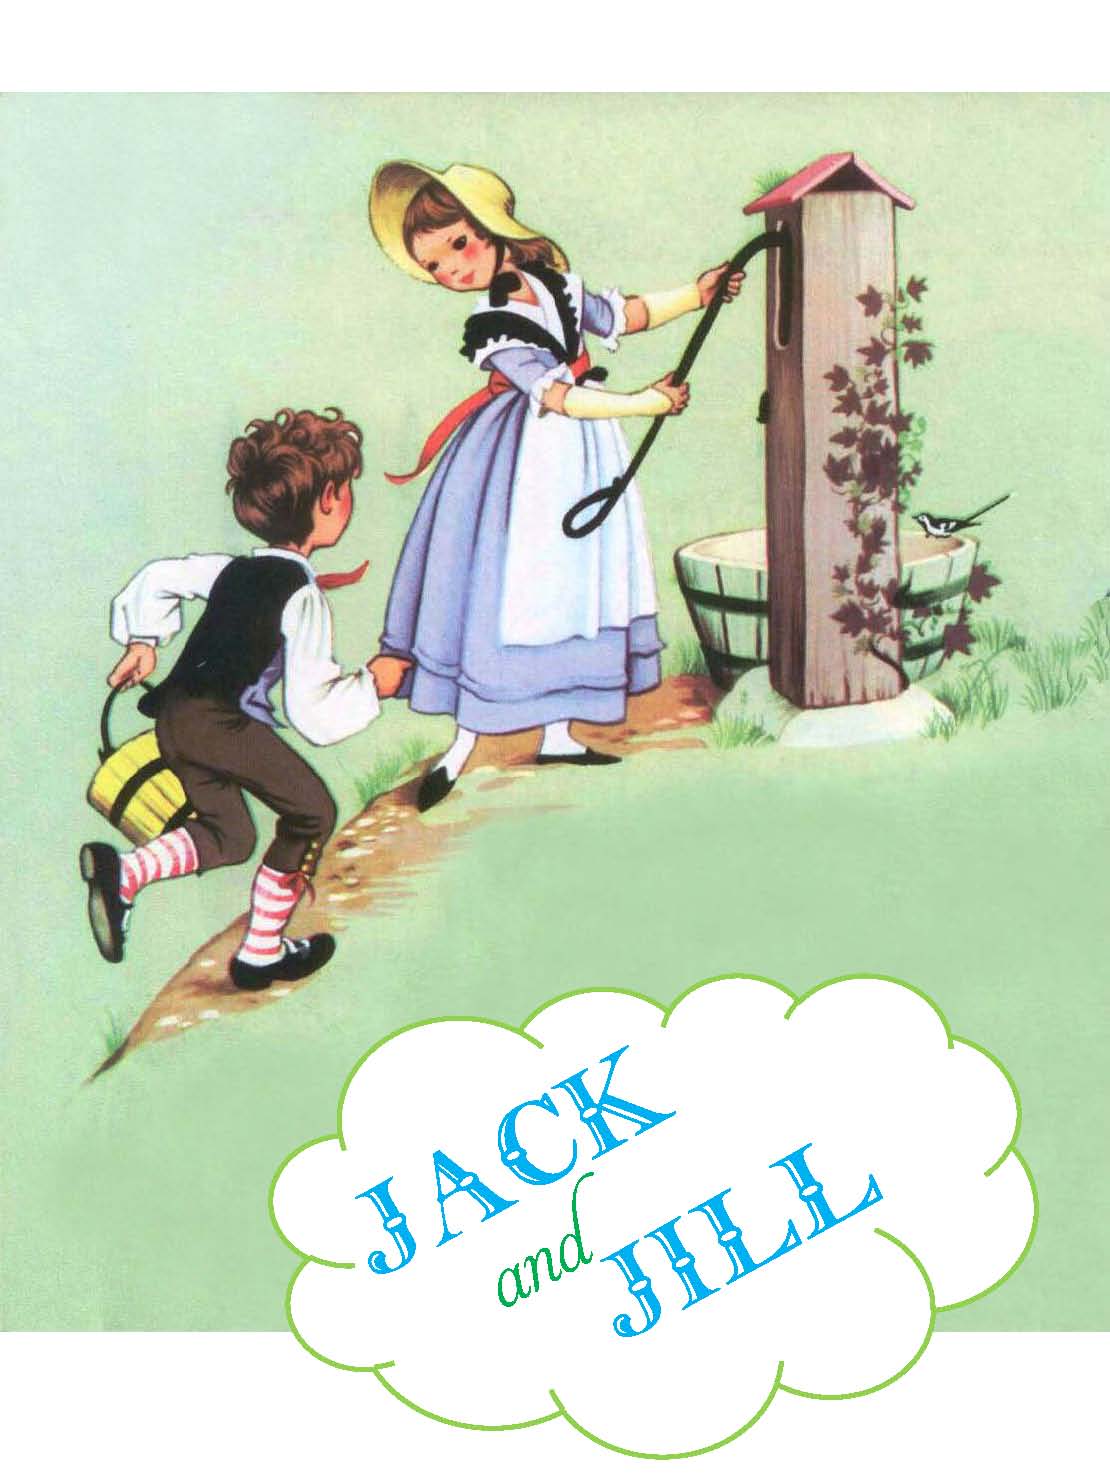 amanda olivier recommends jack and jill parody pic